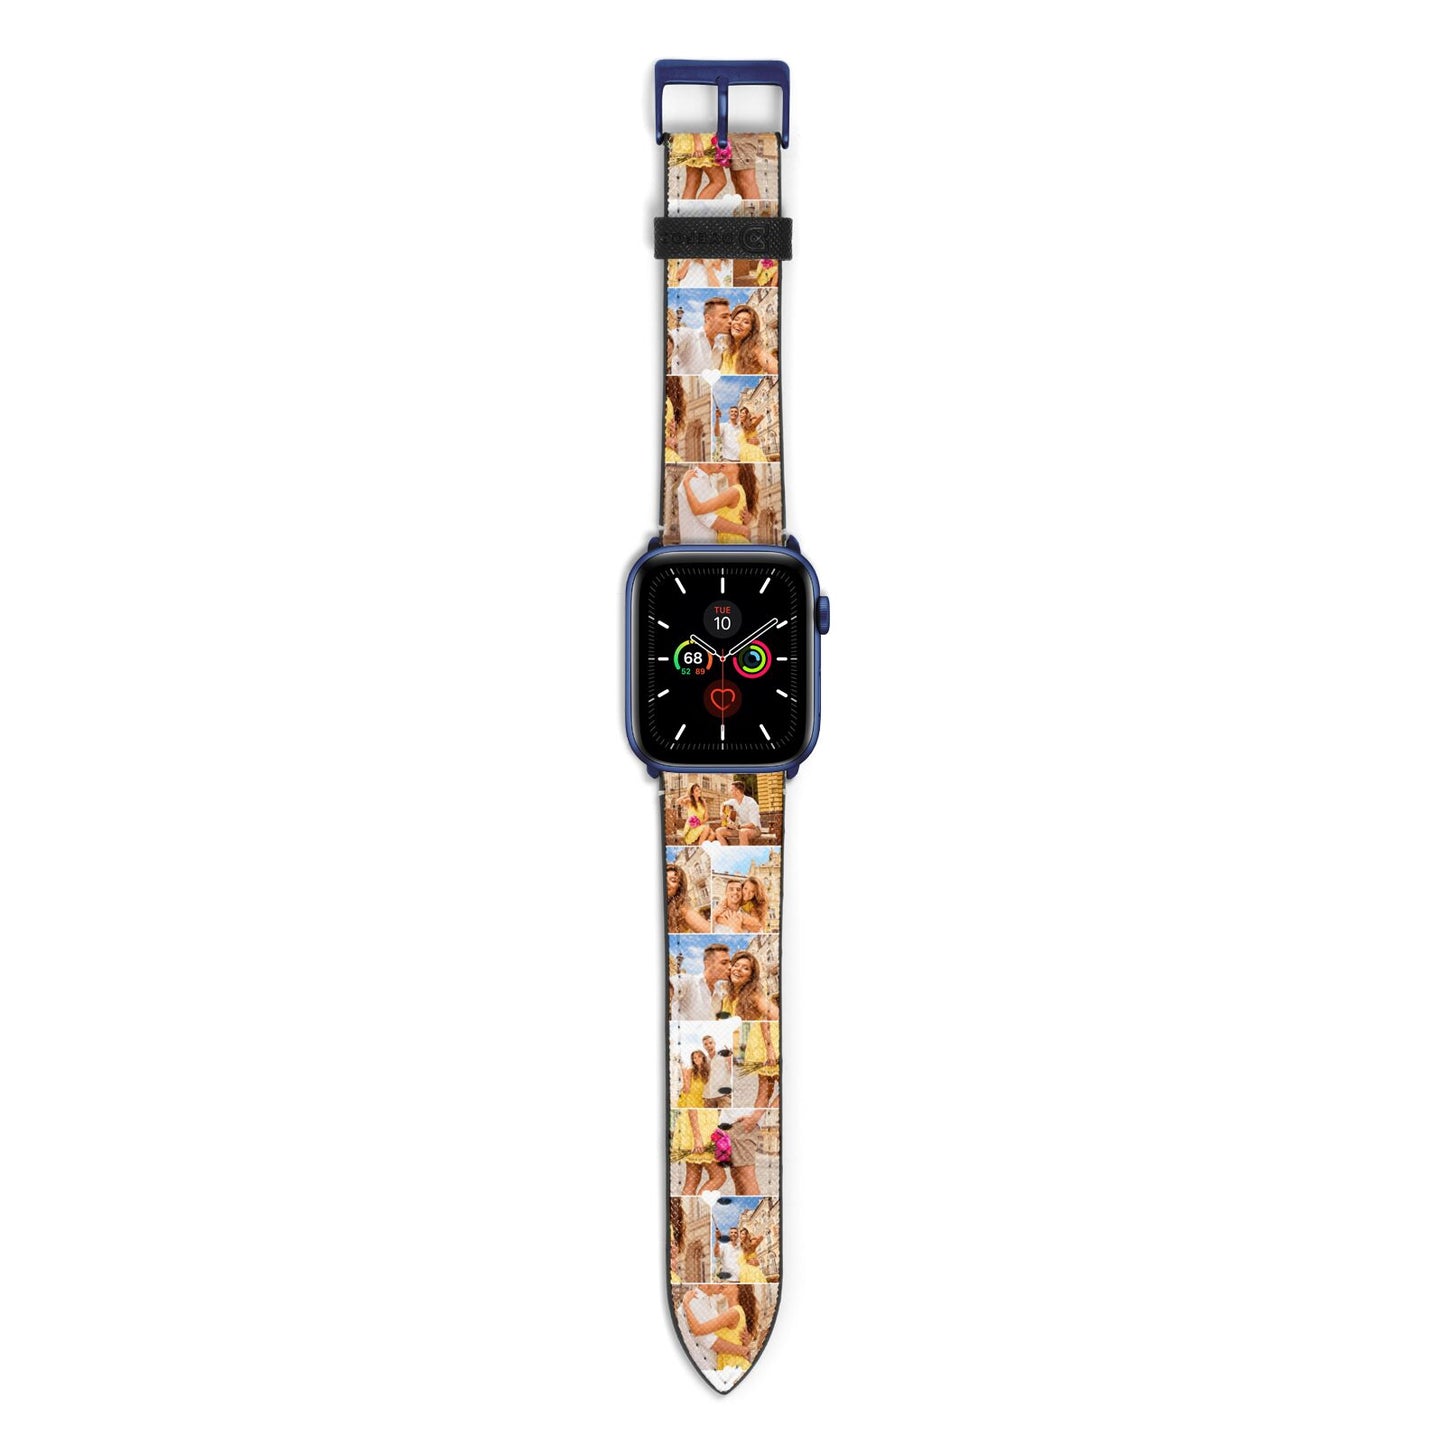 Photo Collage Heart Apple Watch Strap with Blue Hardware